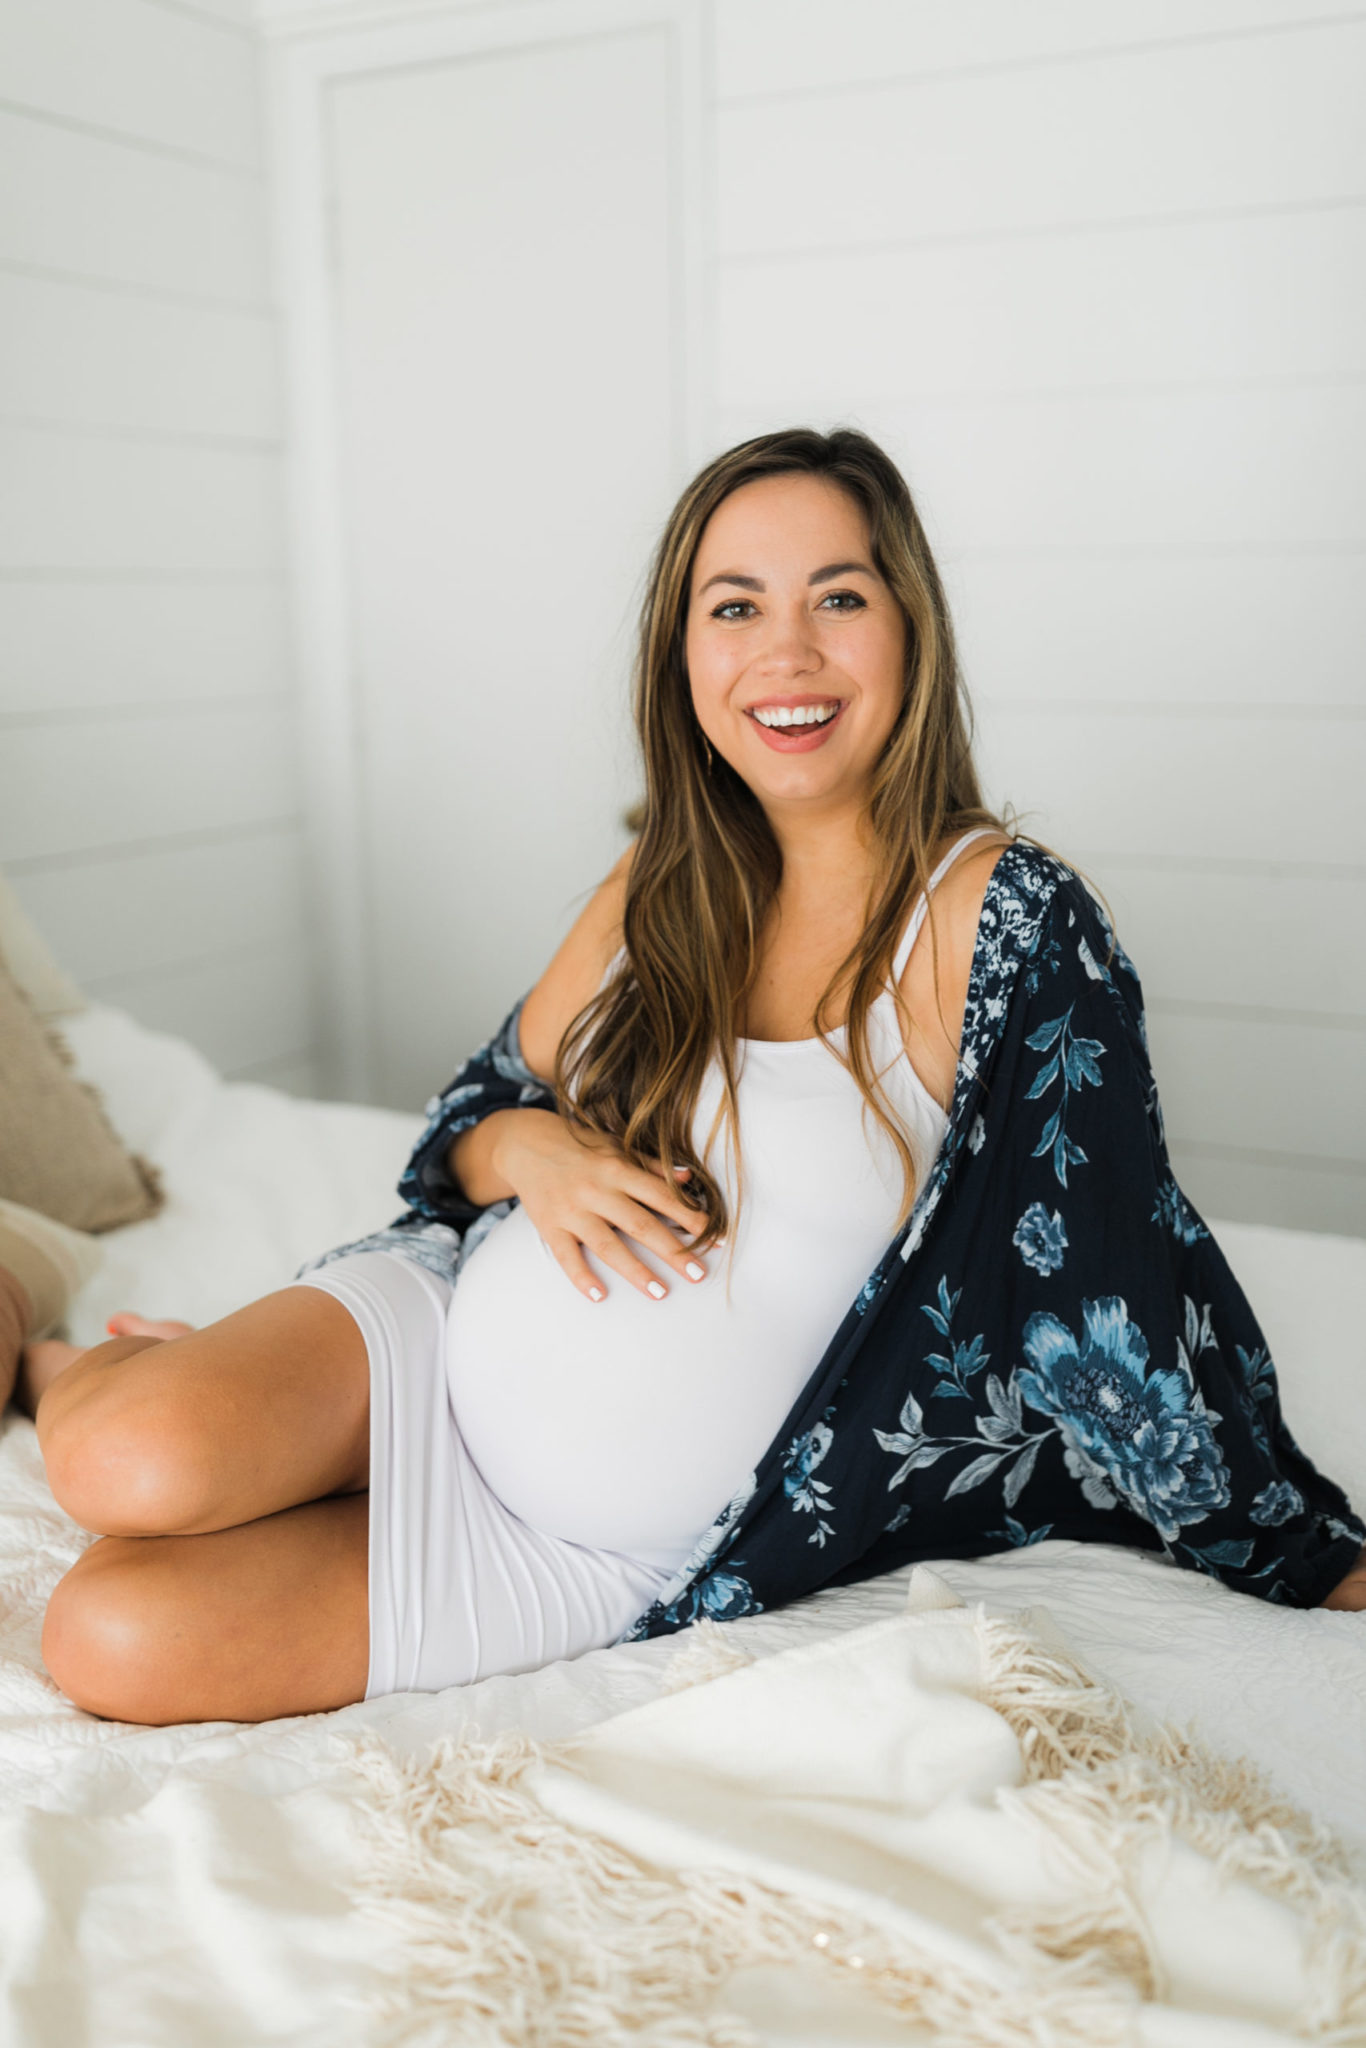 Hear Elizabeth McCravy chat all about her third trimester of pregnancy on the Breakthrough Brand Podcast.